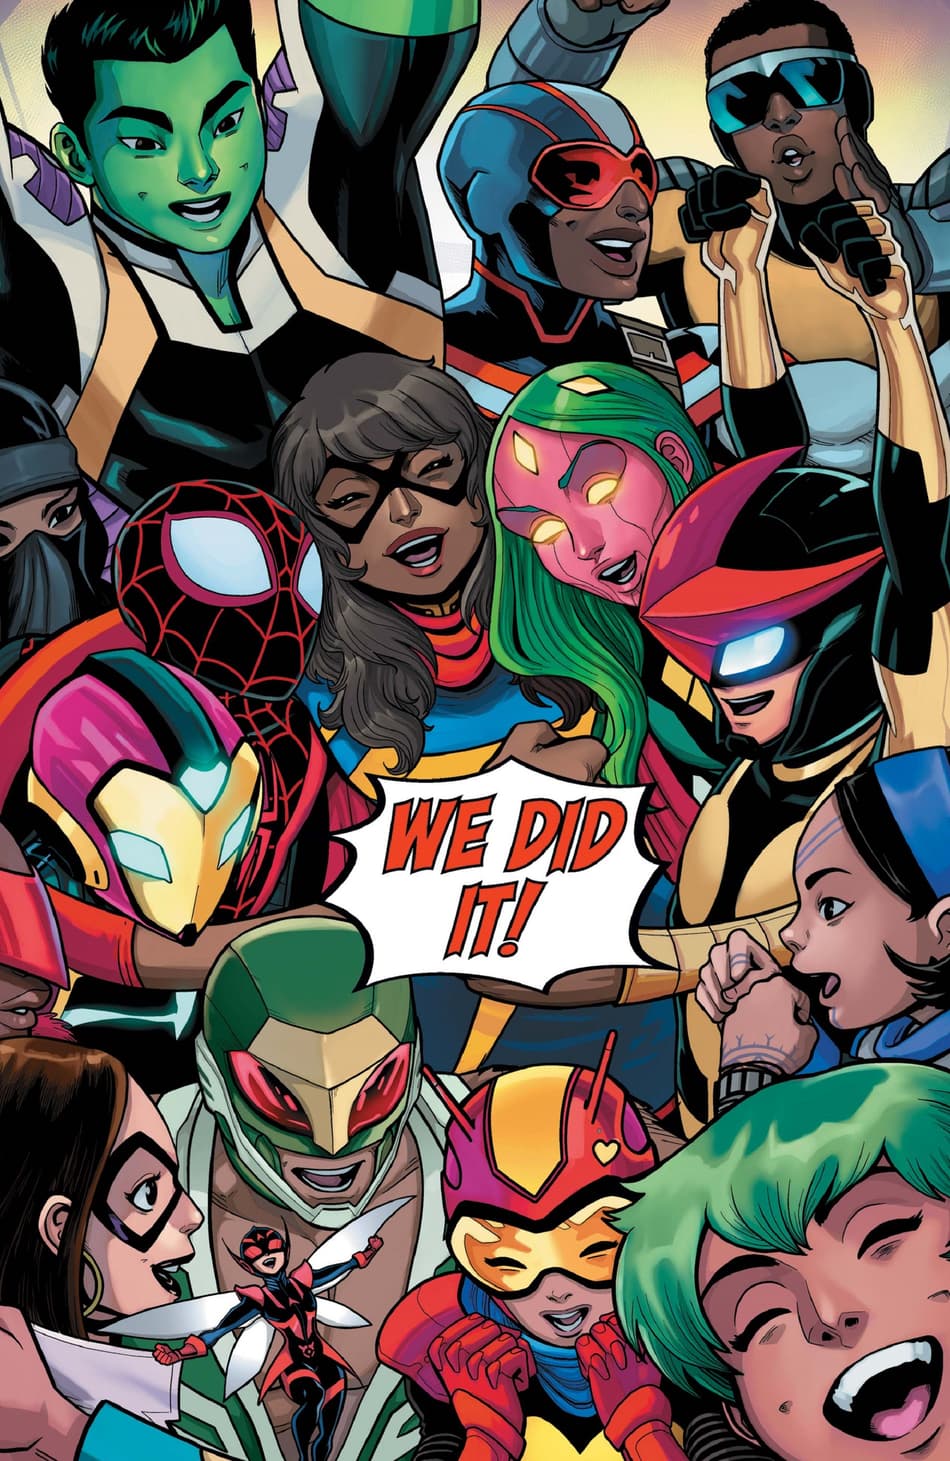 Kamala's Law is repealed and teen heroes celebrate in CHAMPIONS (2020) #9.